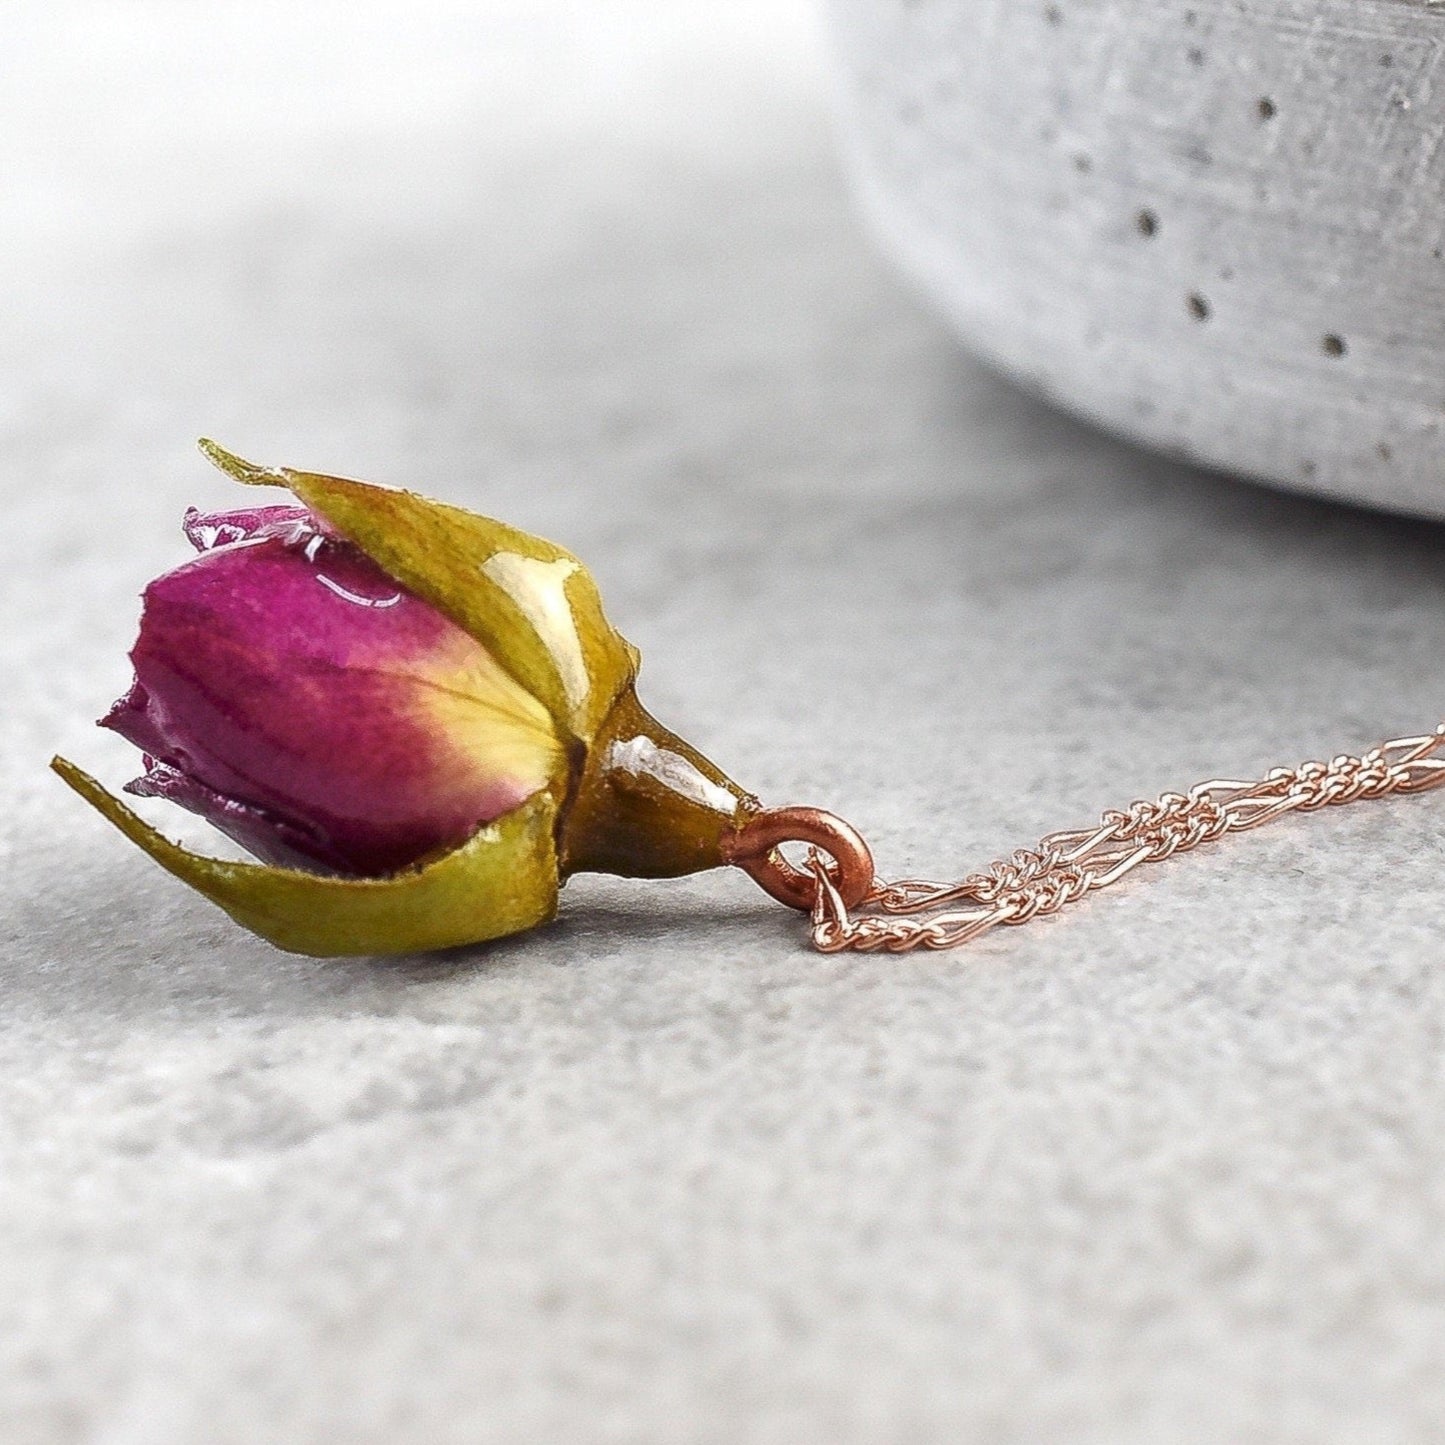 Real Rose Chain - Romantic Jewelry from 925 Sterling Rosegold Gold Plated - Nature Jewelry - K925-50